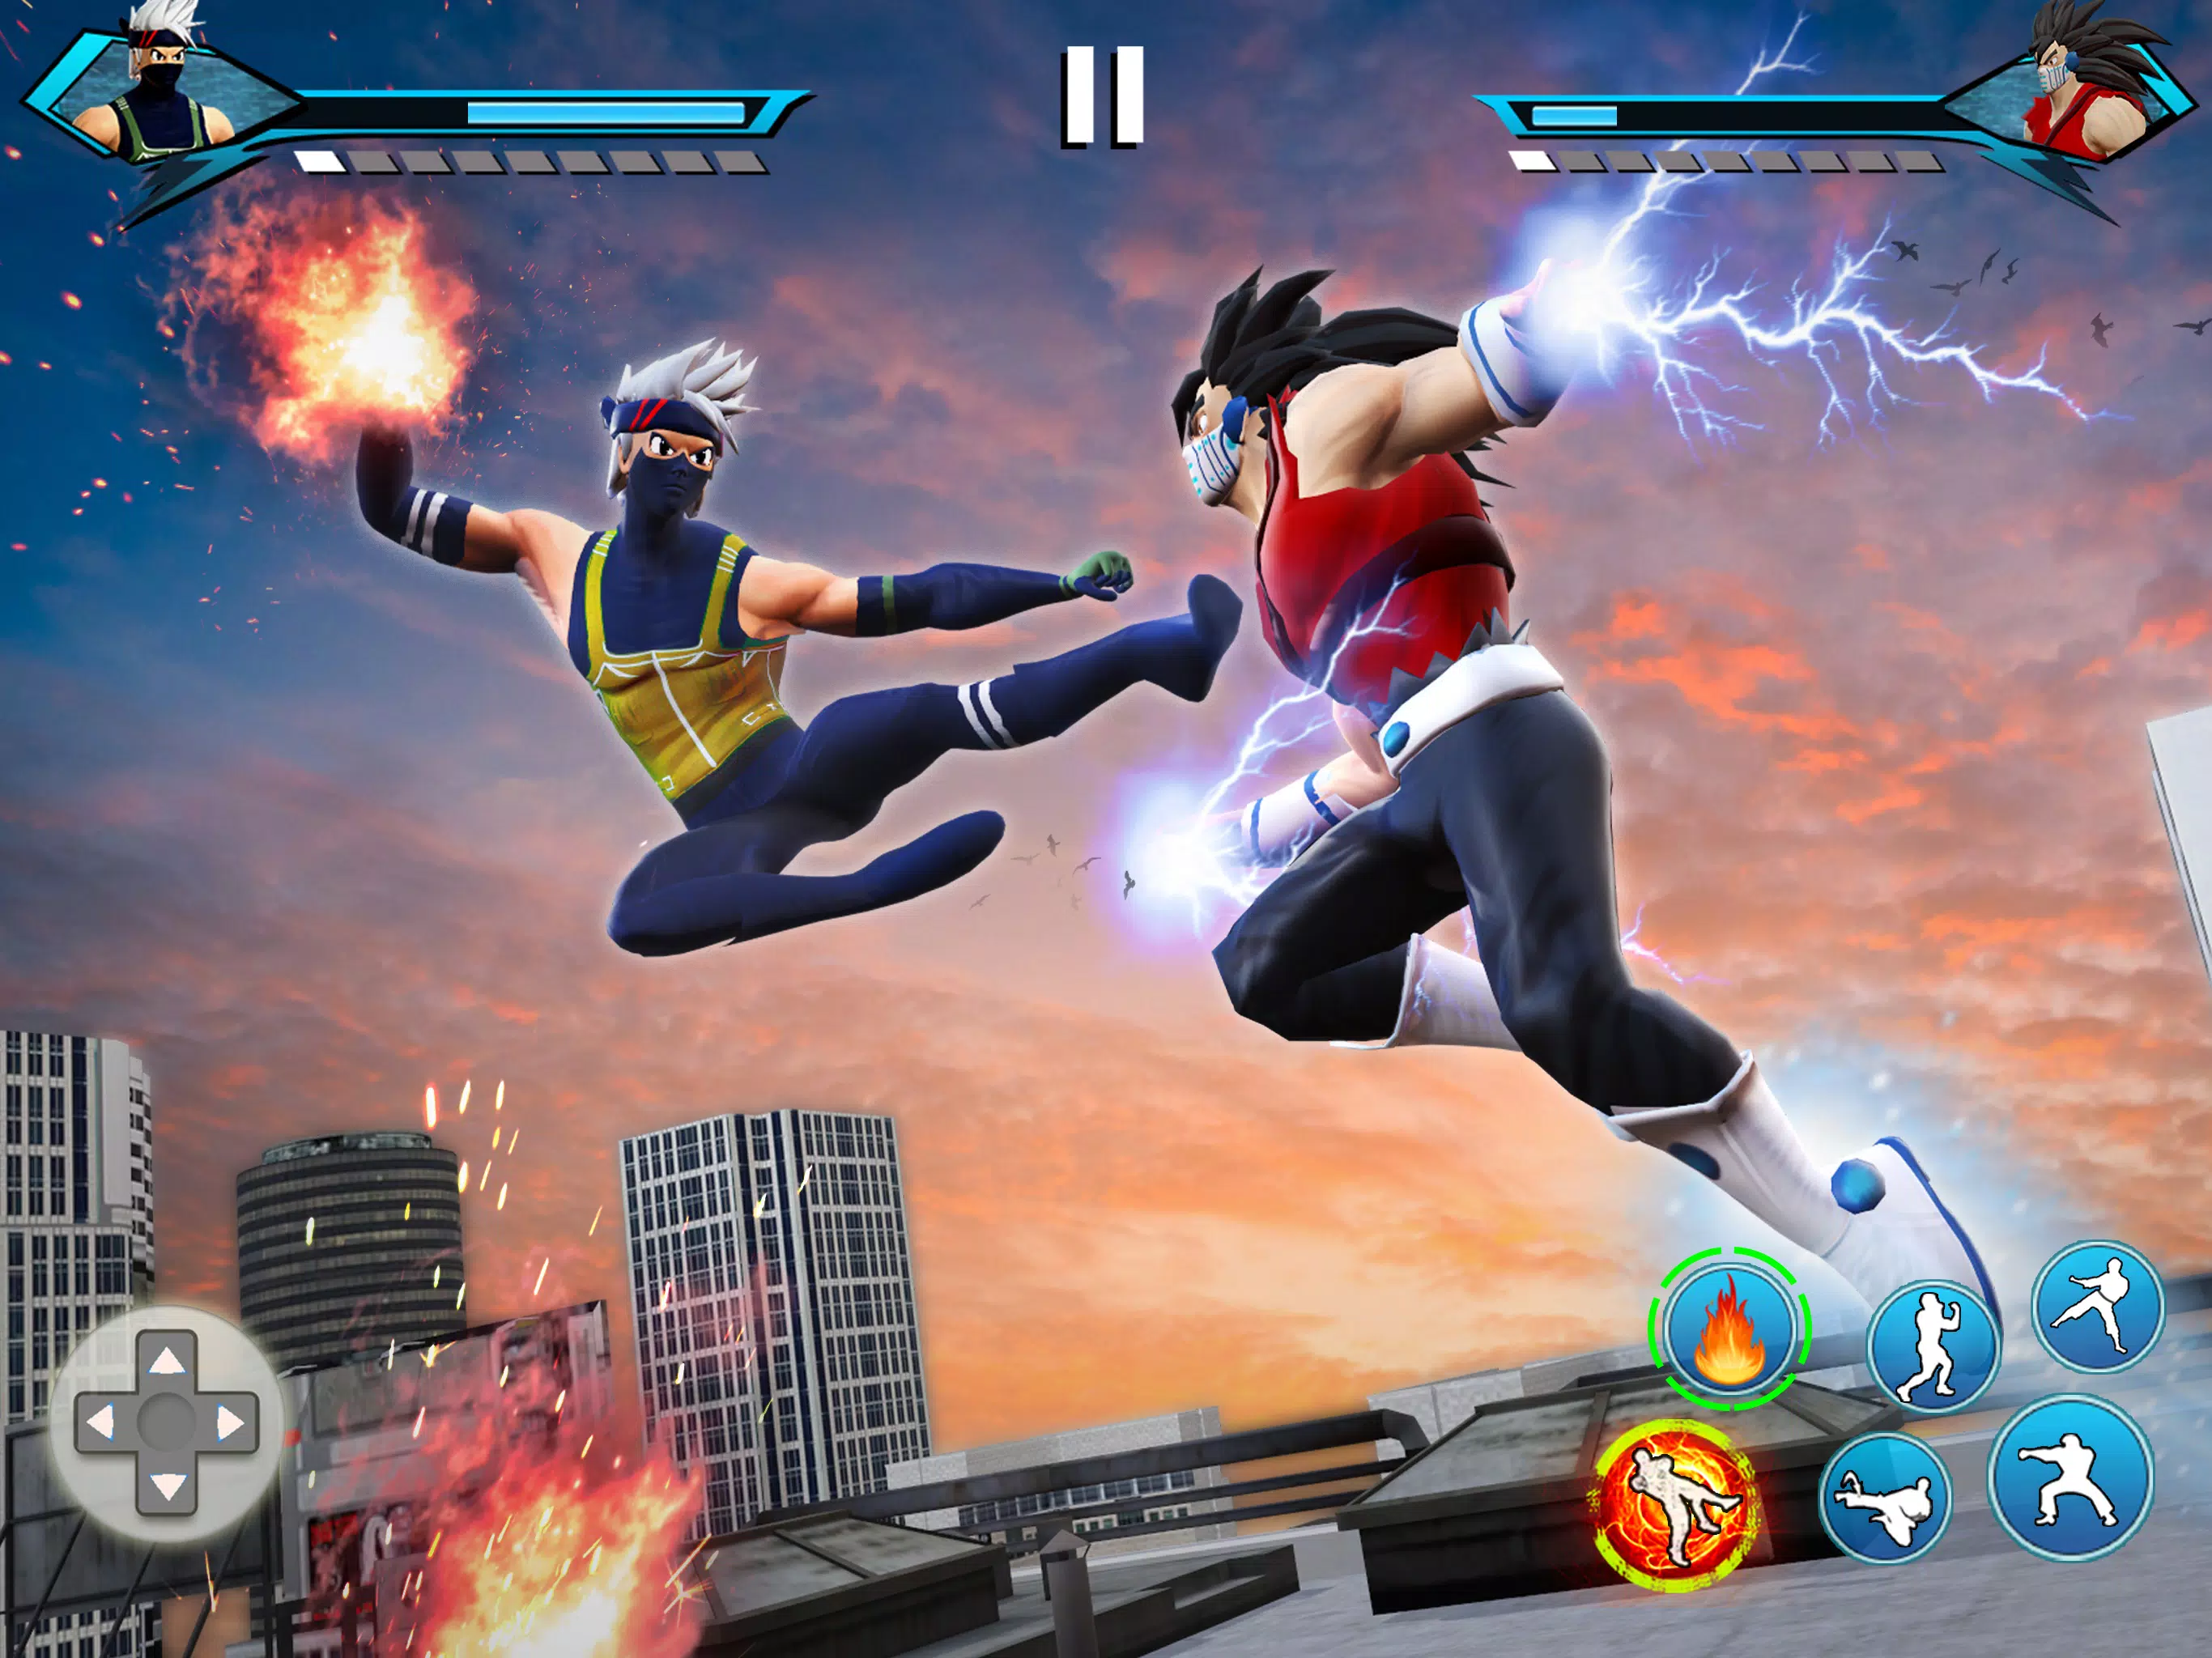 Karate King Fight APK Download for Android Free